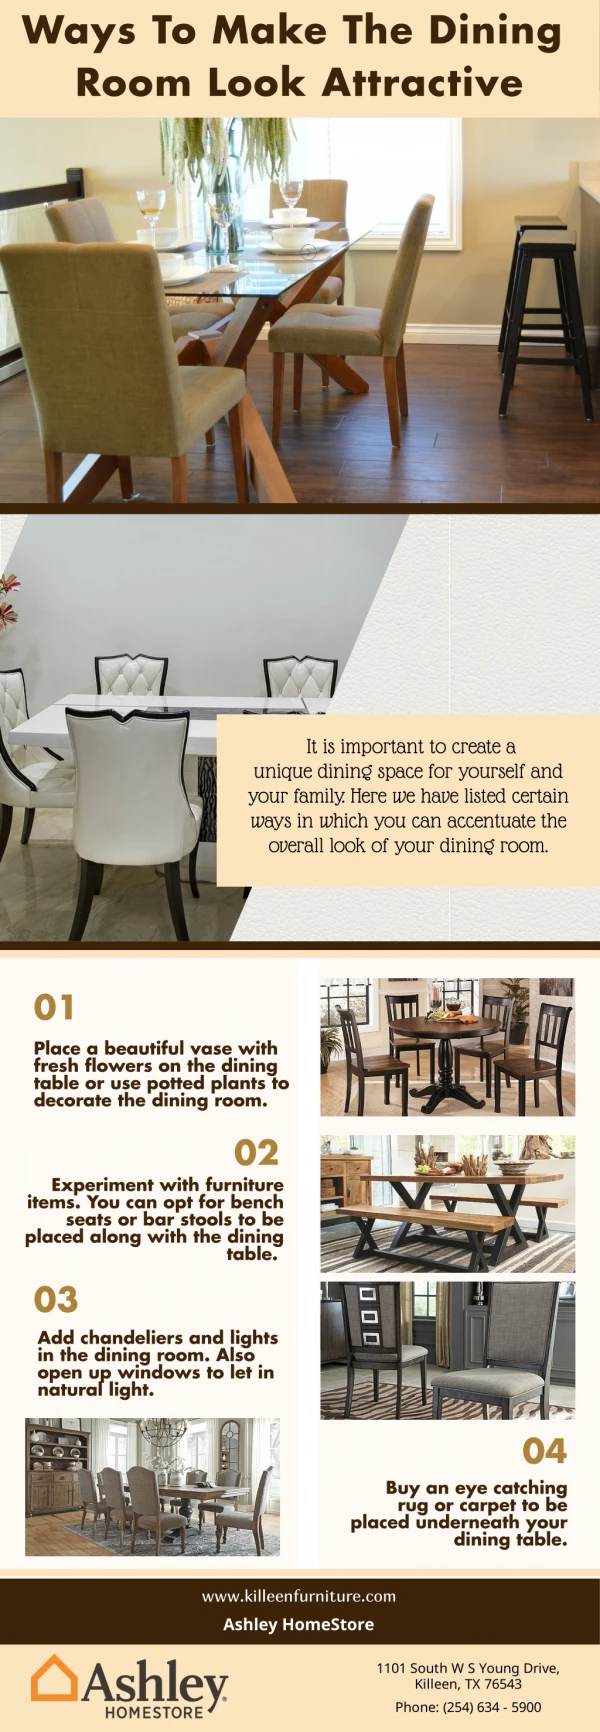 Ways To Make The Dining Room Look Attractive